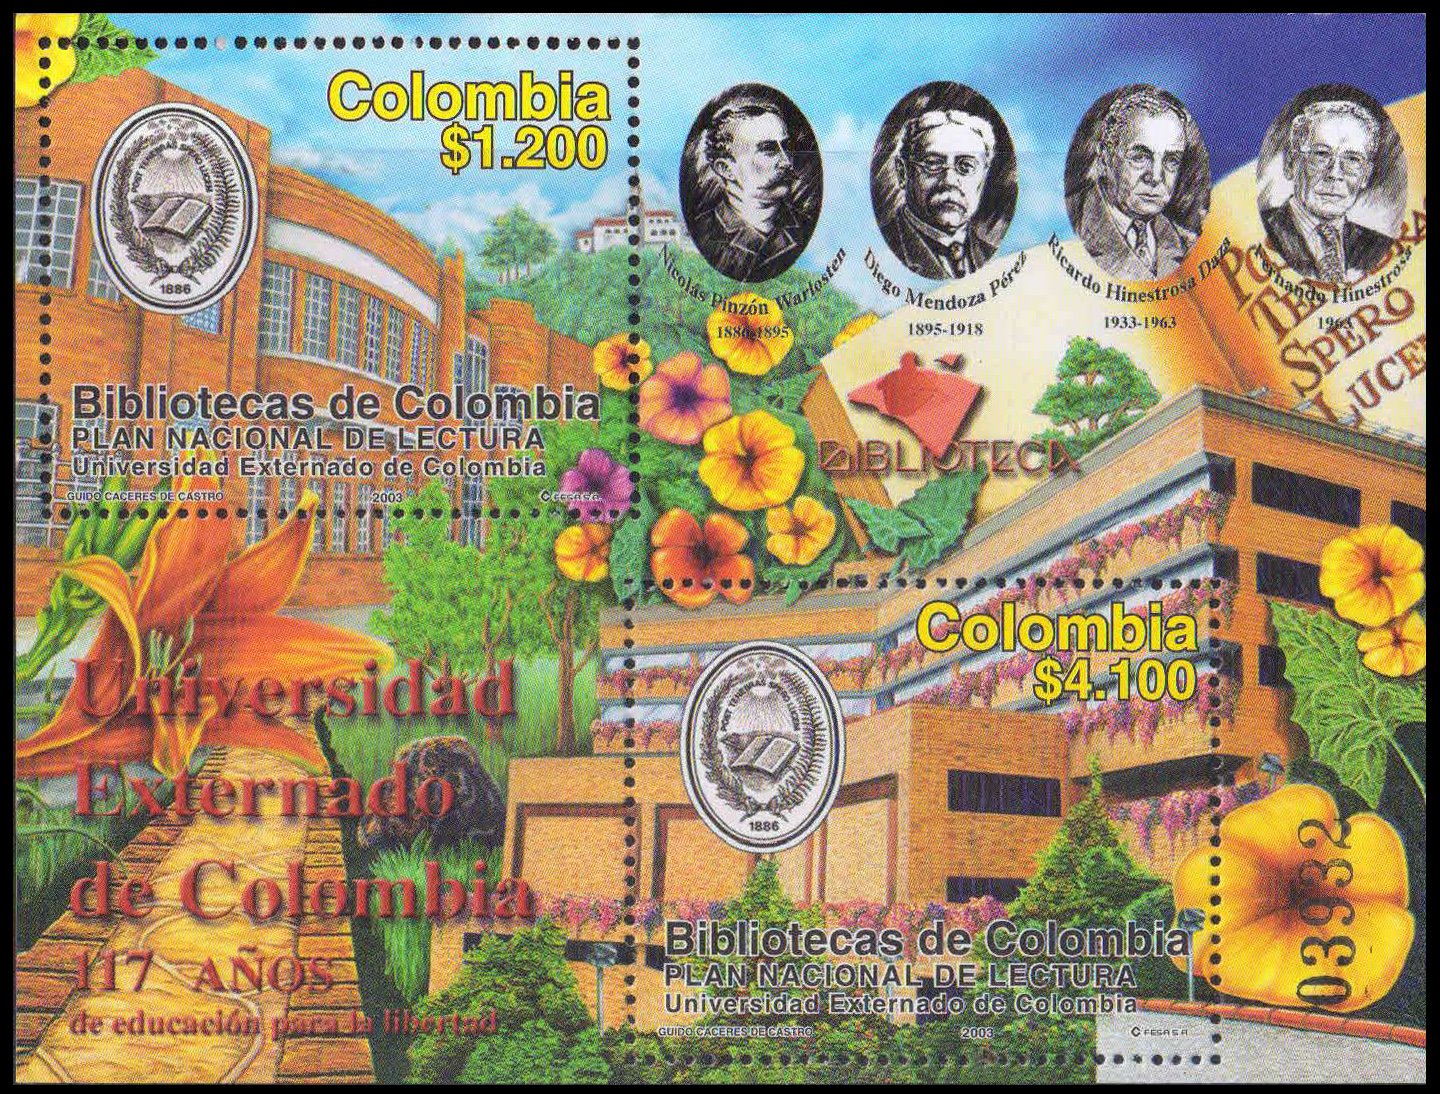 COLOMBIA 2003-117th Anniv. of Universal Externado de Colombia, Emblem and Building Facade, S/Sheet of 2 Stamps, MNH